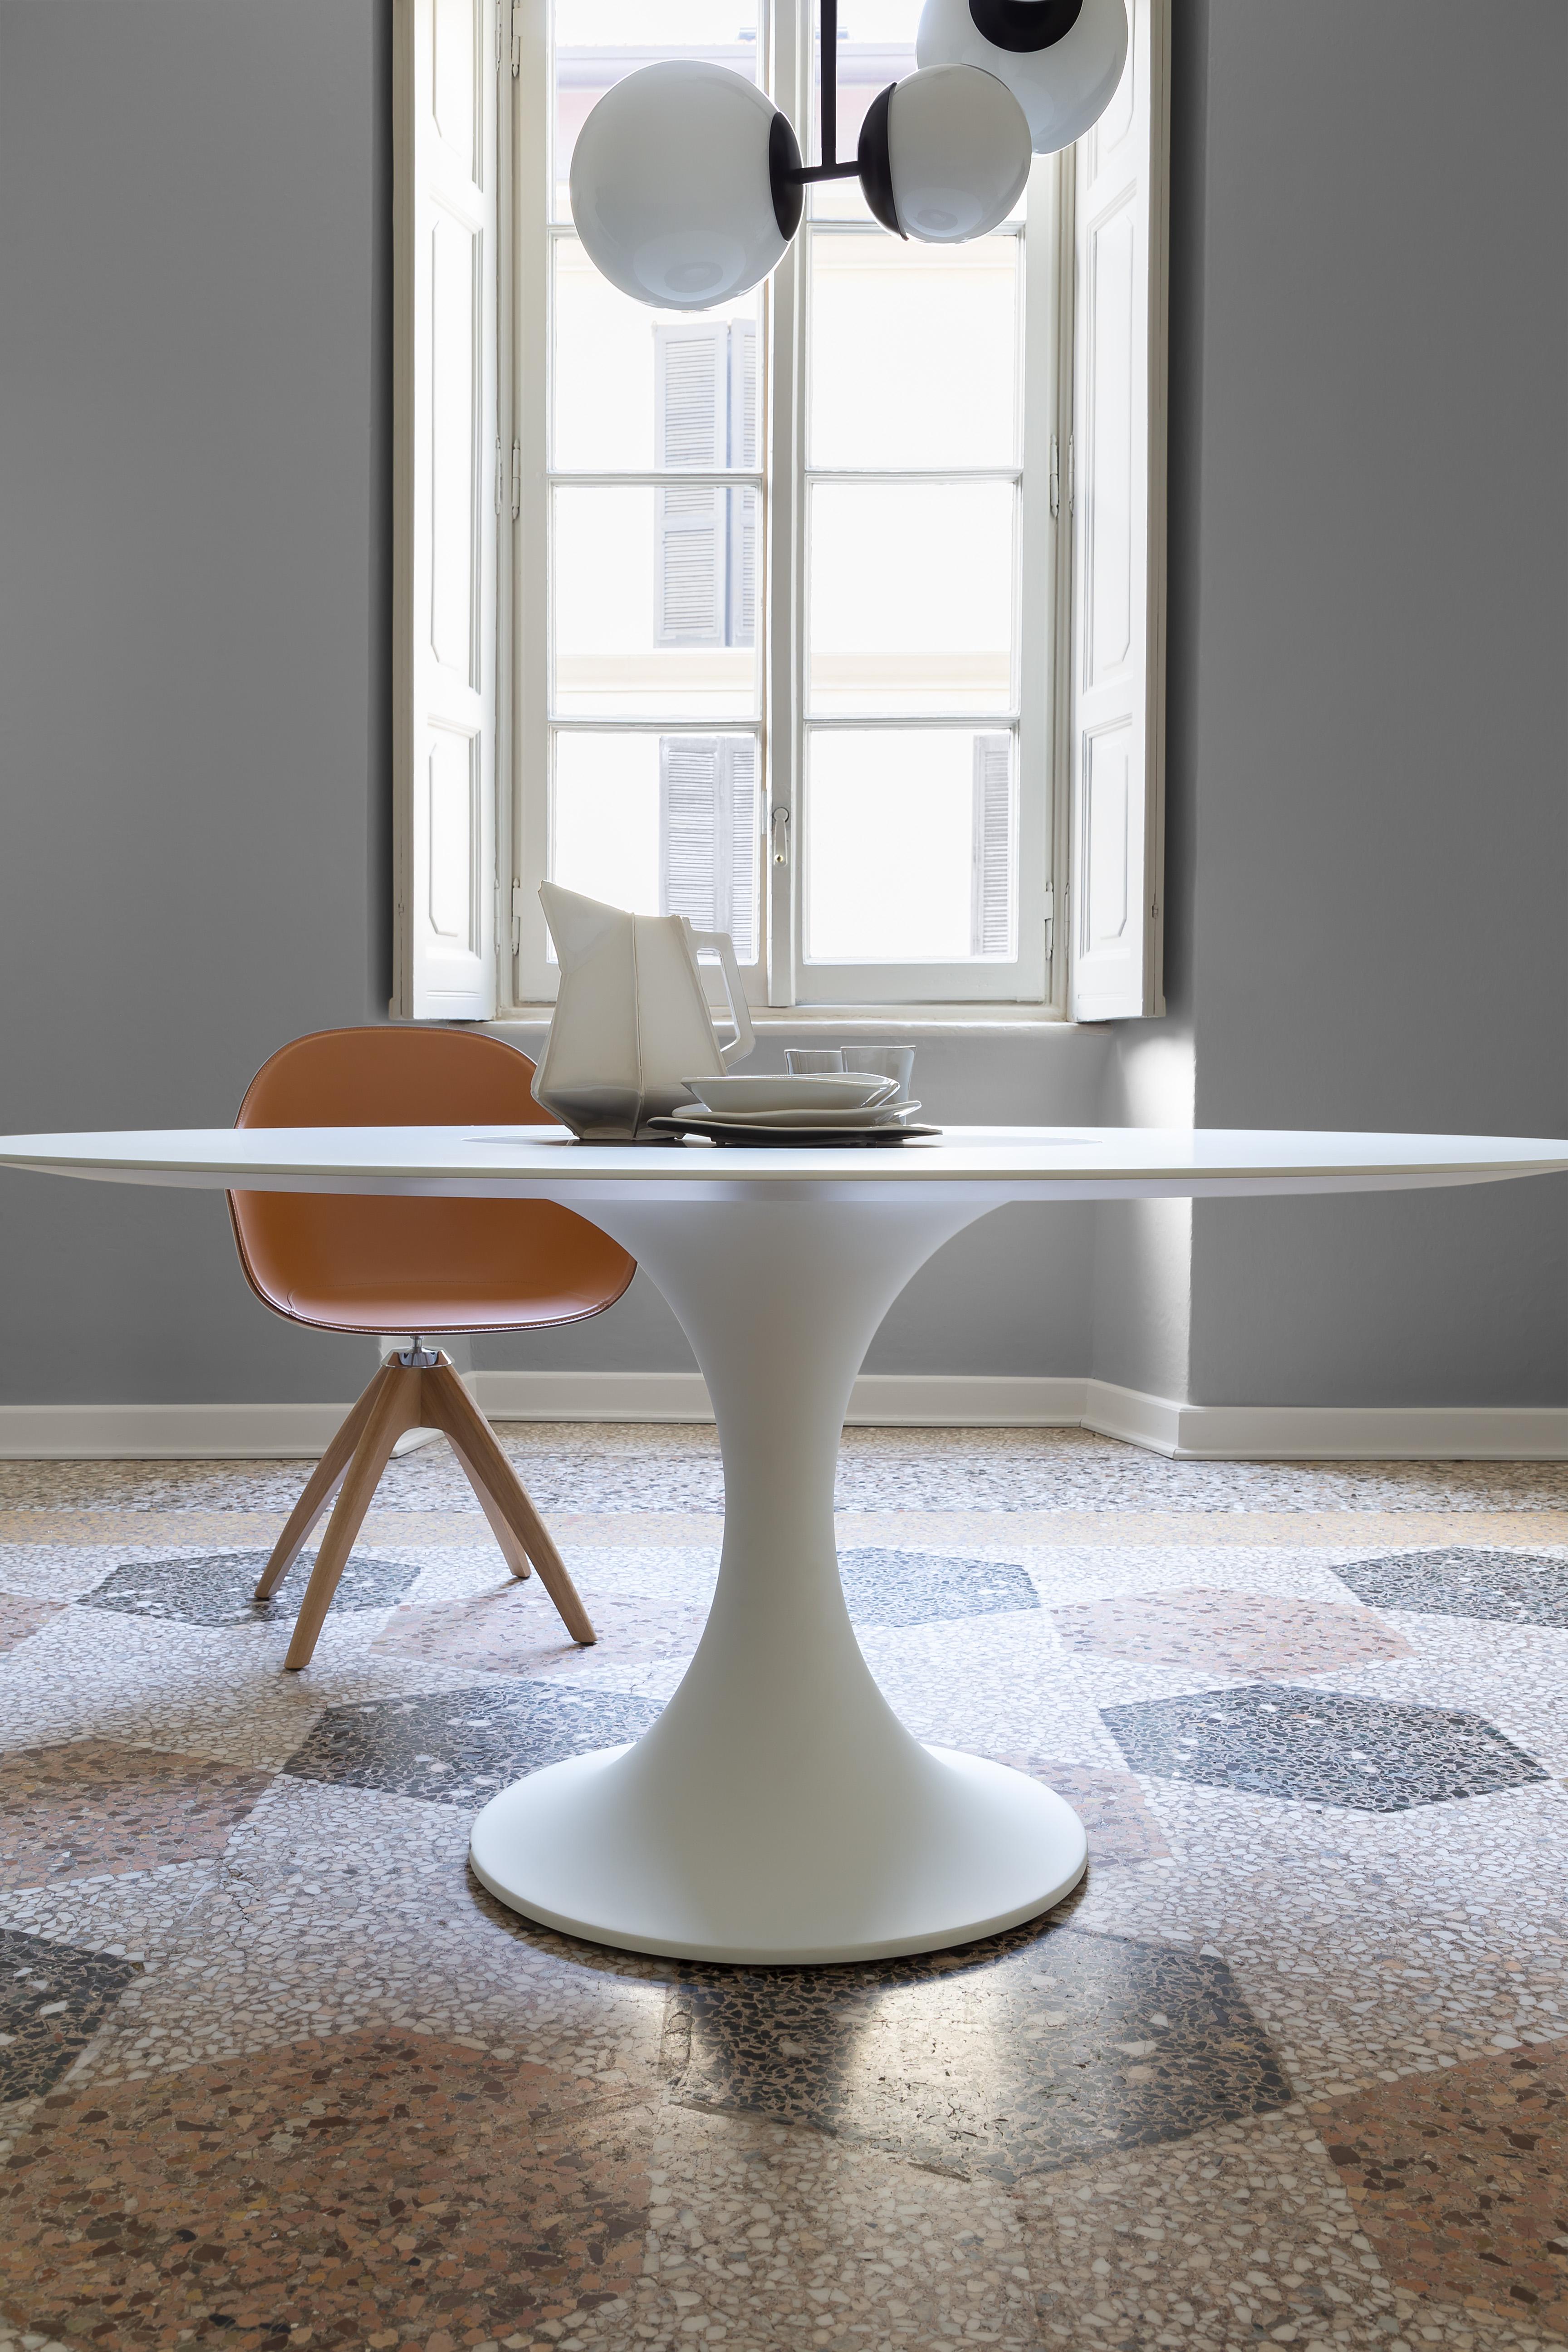 Alias Large 08C Manzù Turn Table in Grey Anodised Top with White Lacquered Frame by Pio Manzù

Round table with base in lacquered plastic material (internal frame in steel). Top in lacquered MDF (*). Central turning plate Ø63 cm in:- lacquered